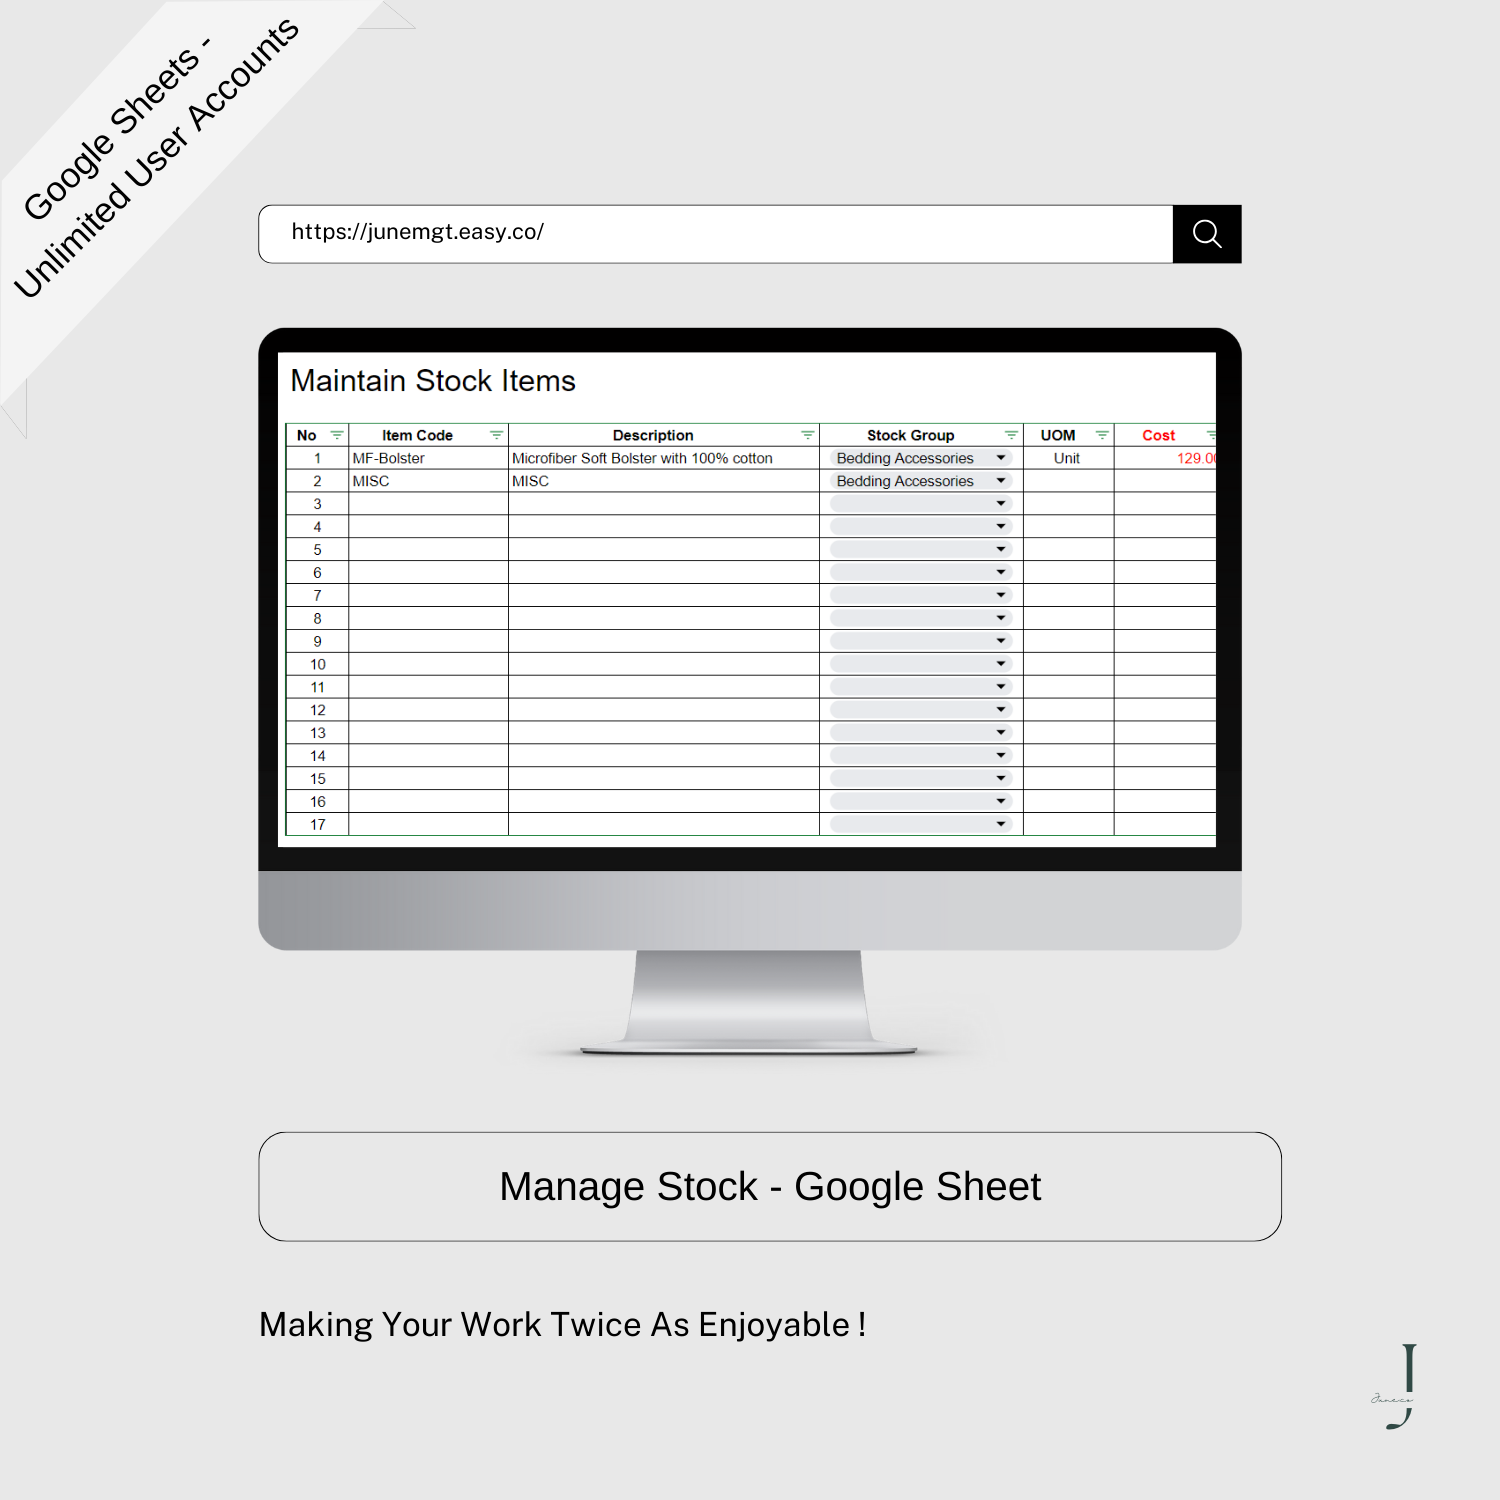 MANAGE sTOCK- PRODUCT